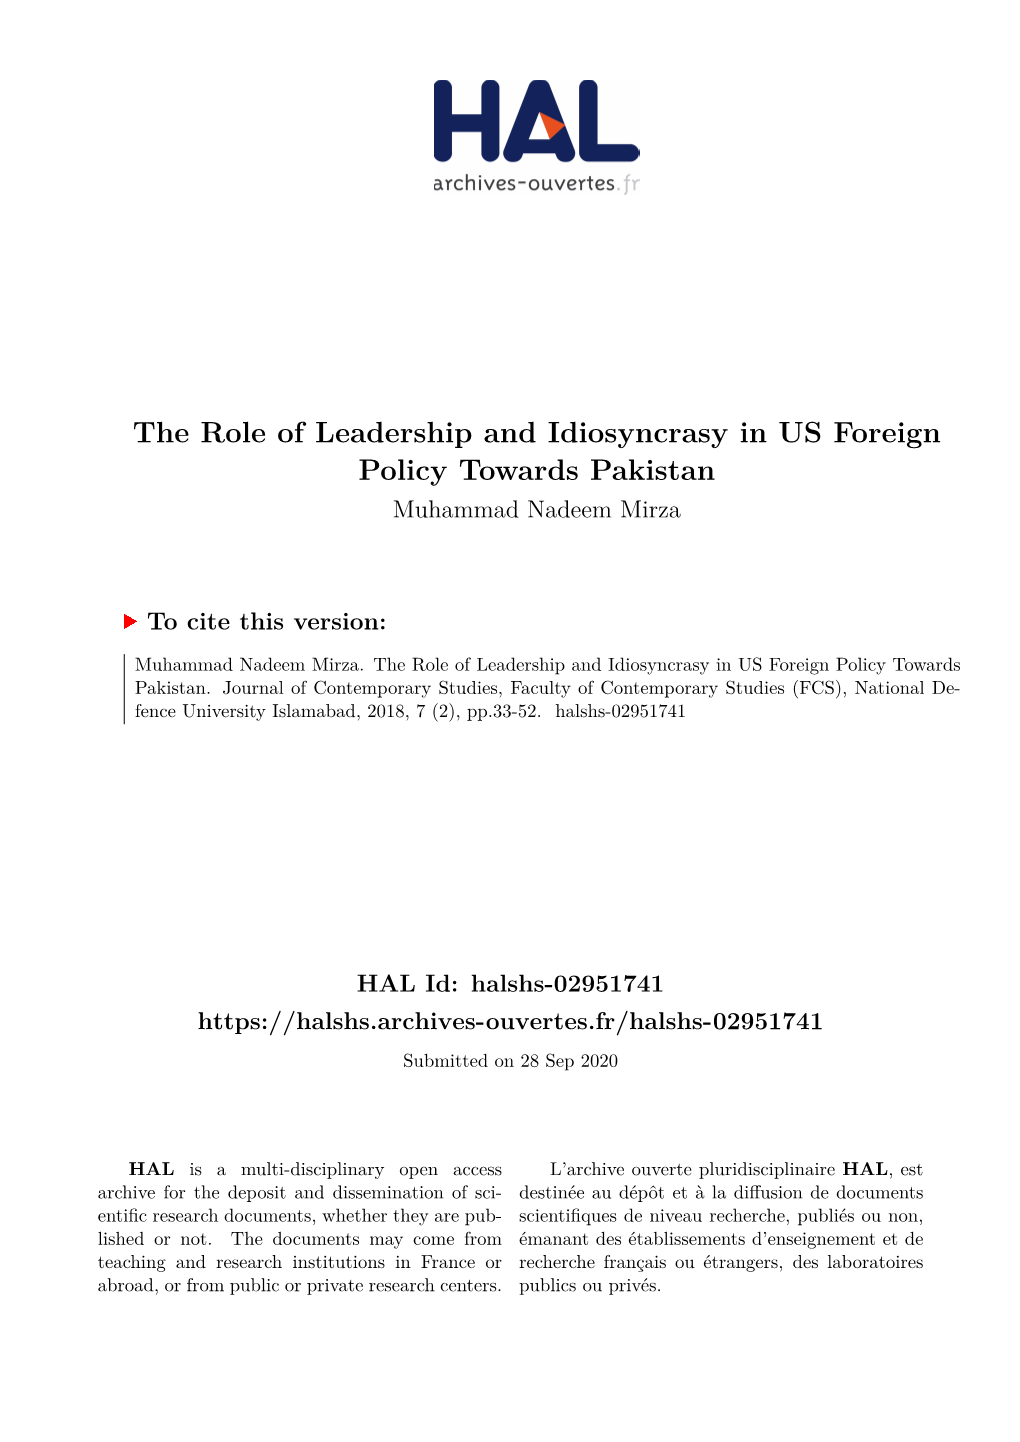 The Role of Leadership and Idiosyncrasy in US Foreign Policy Towards Pakistan Muhammad Nadeem Mirza